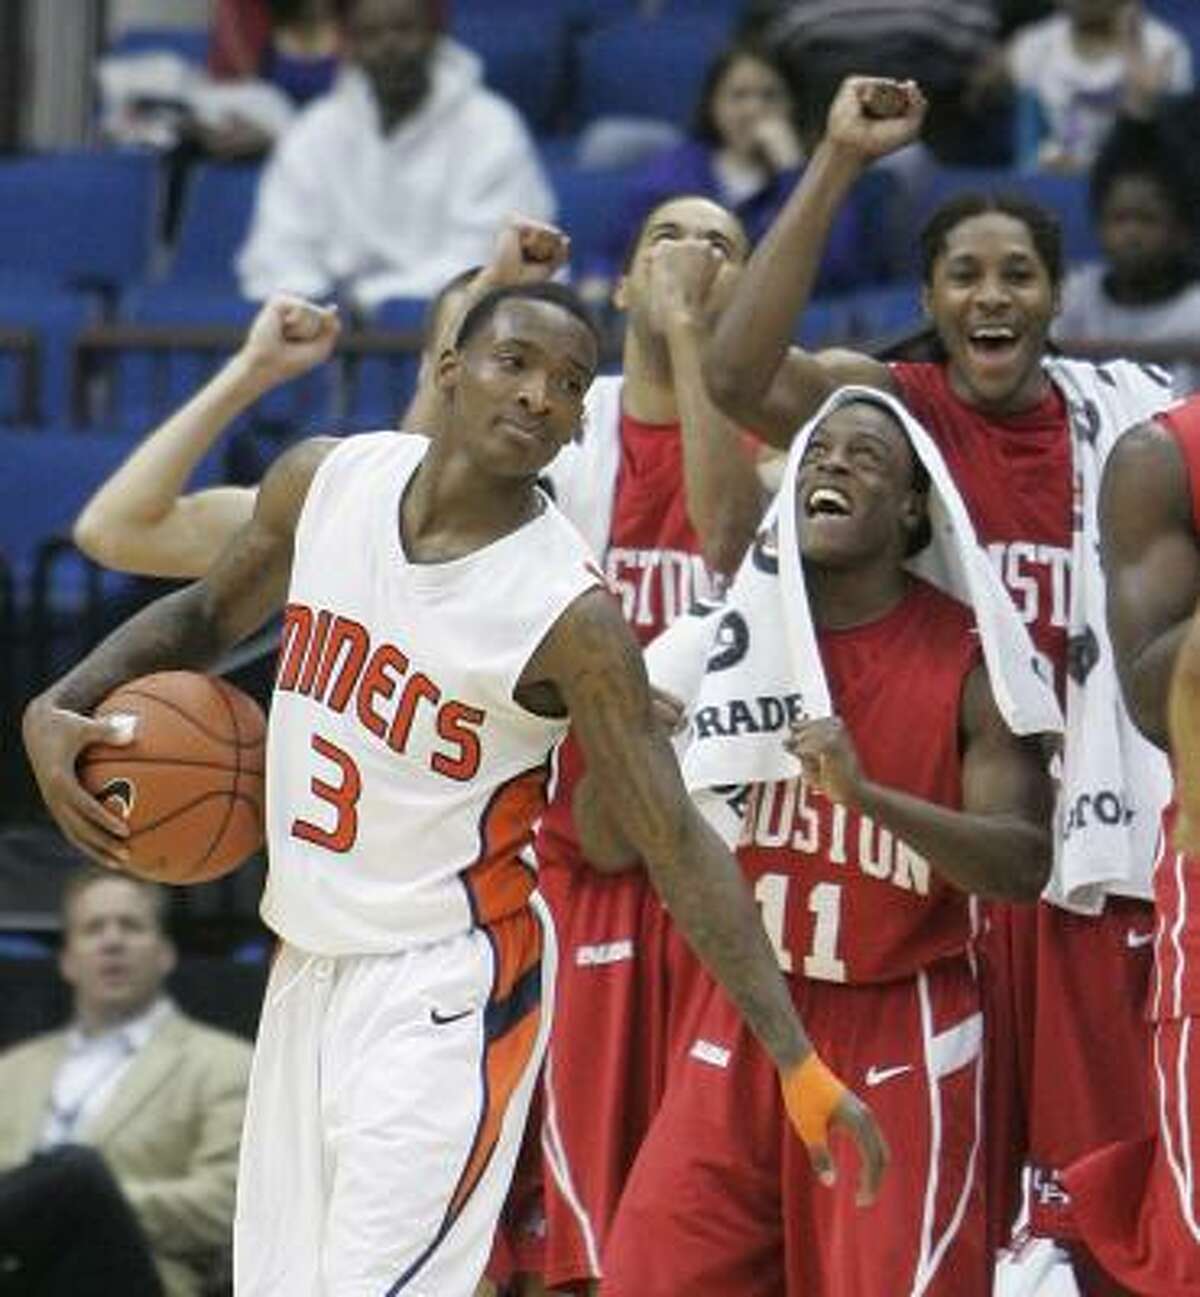 UTEP guard Randy Culpepper holds the ball as the Houston bench cheers at rear, following a whistle in the closing minutes of the Conference USA men's championship NCAA college basketball game in Tulsa, Okla., Saturday, March 13, 2010. Houston won 81-73.